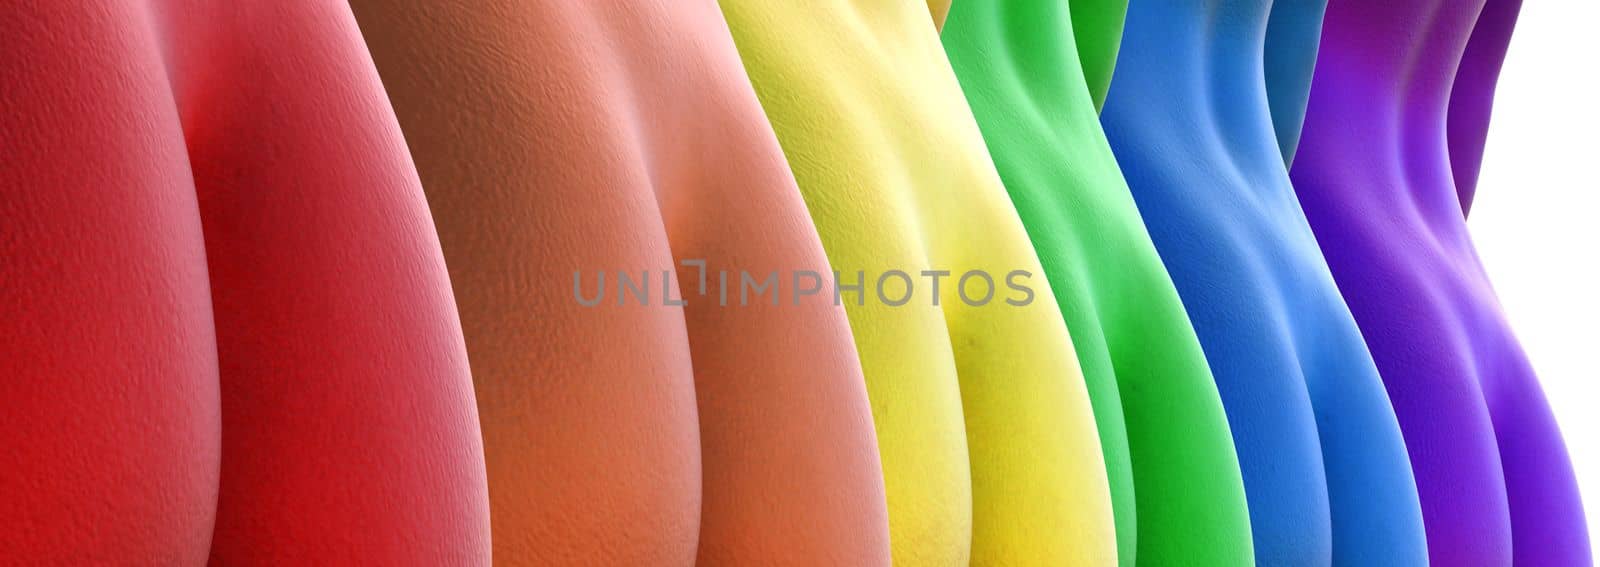 3d illustration. Close-up of multicolored naked female buttocks. Rainbow. metal